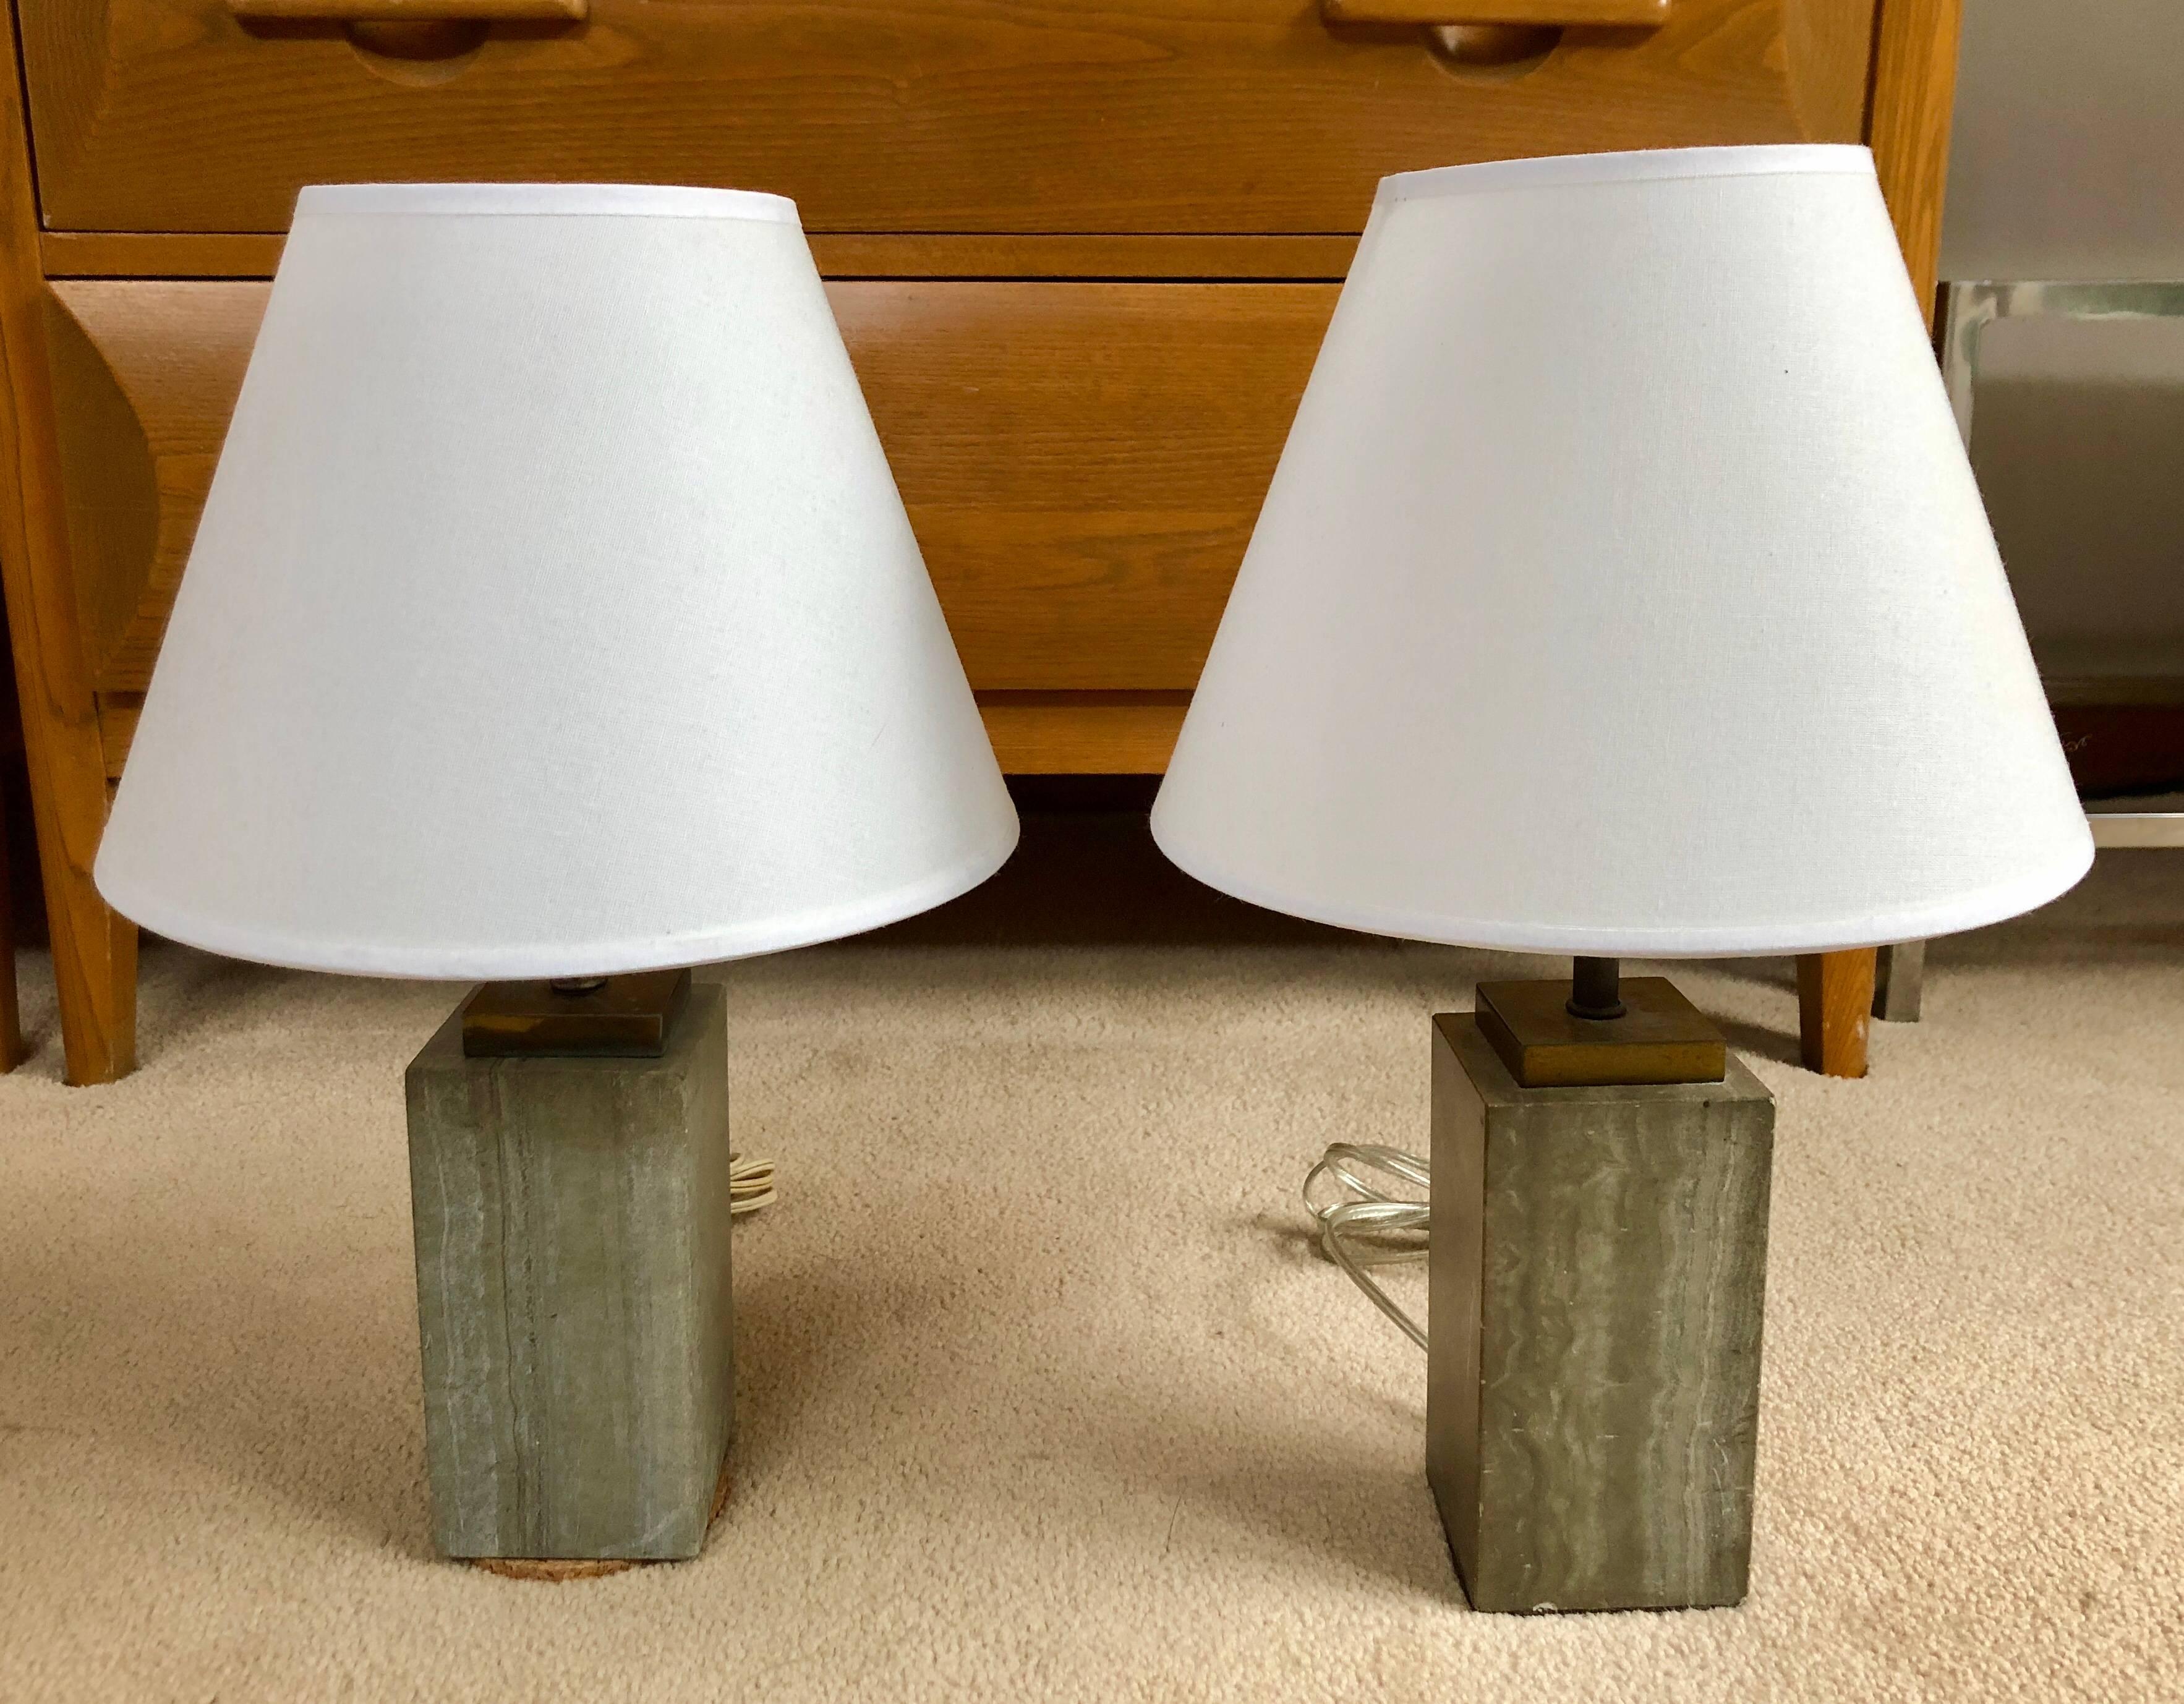 Pair of small slate grey marble table or bedside lamps with brass fittings. Measures: Marble height is 6.5 inches.